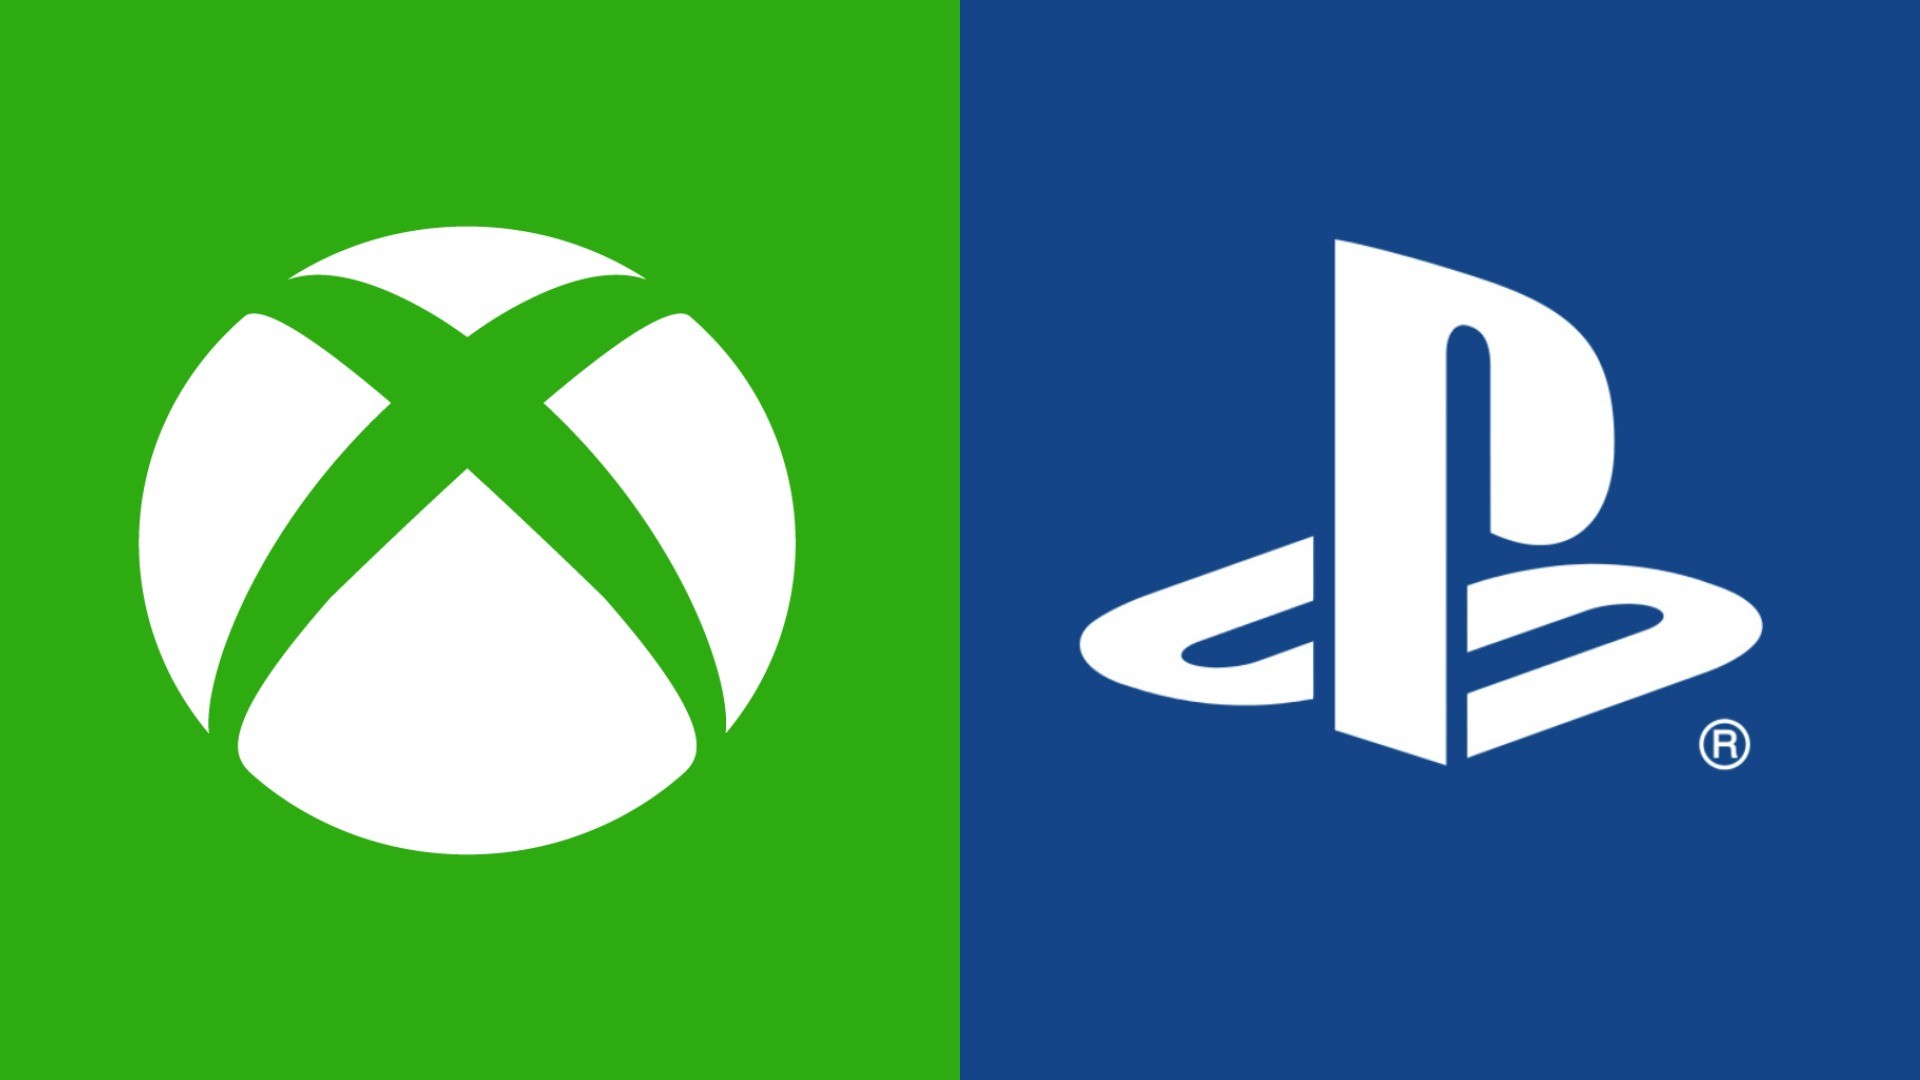 Microsoft Blocked PlayStation Plus On Xbox, Just Like Sony Blocked Game Pass On Its Consoles
